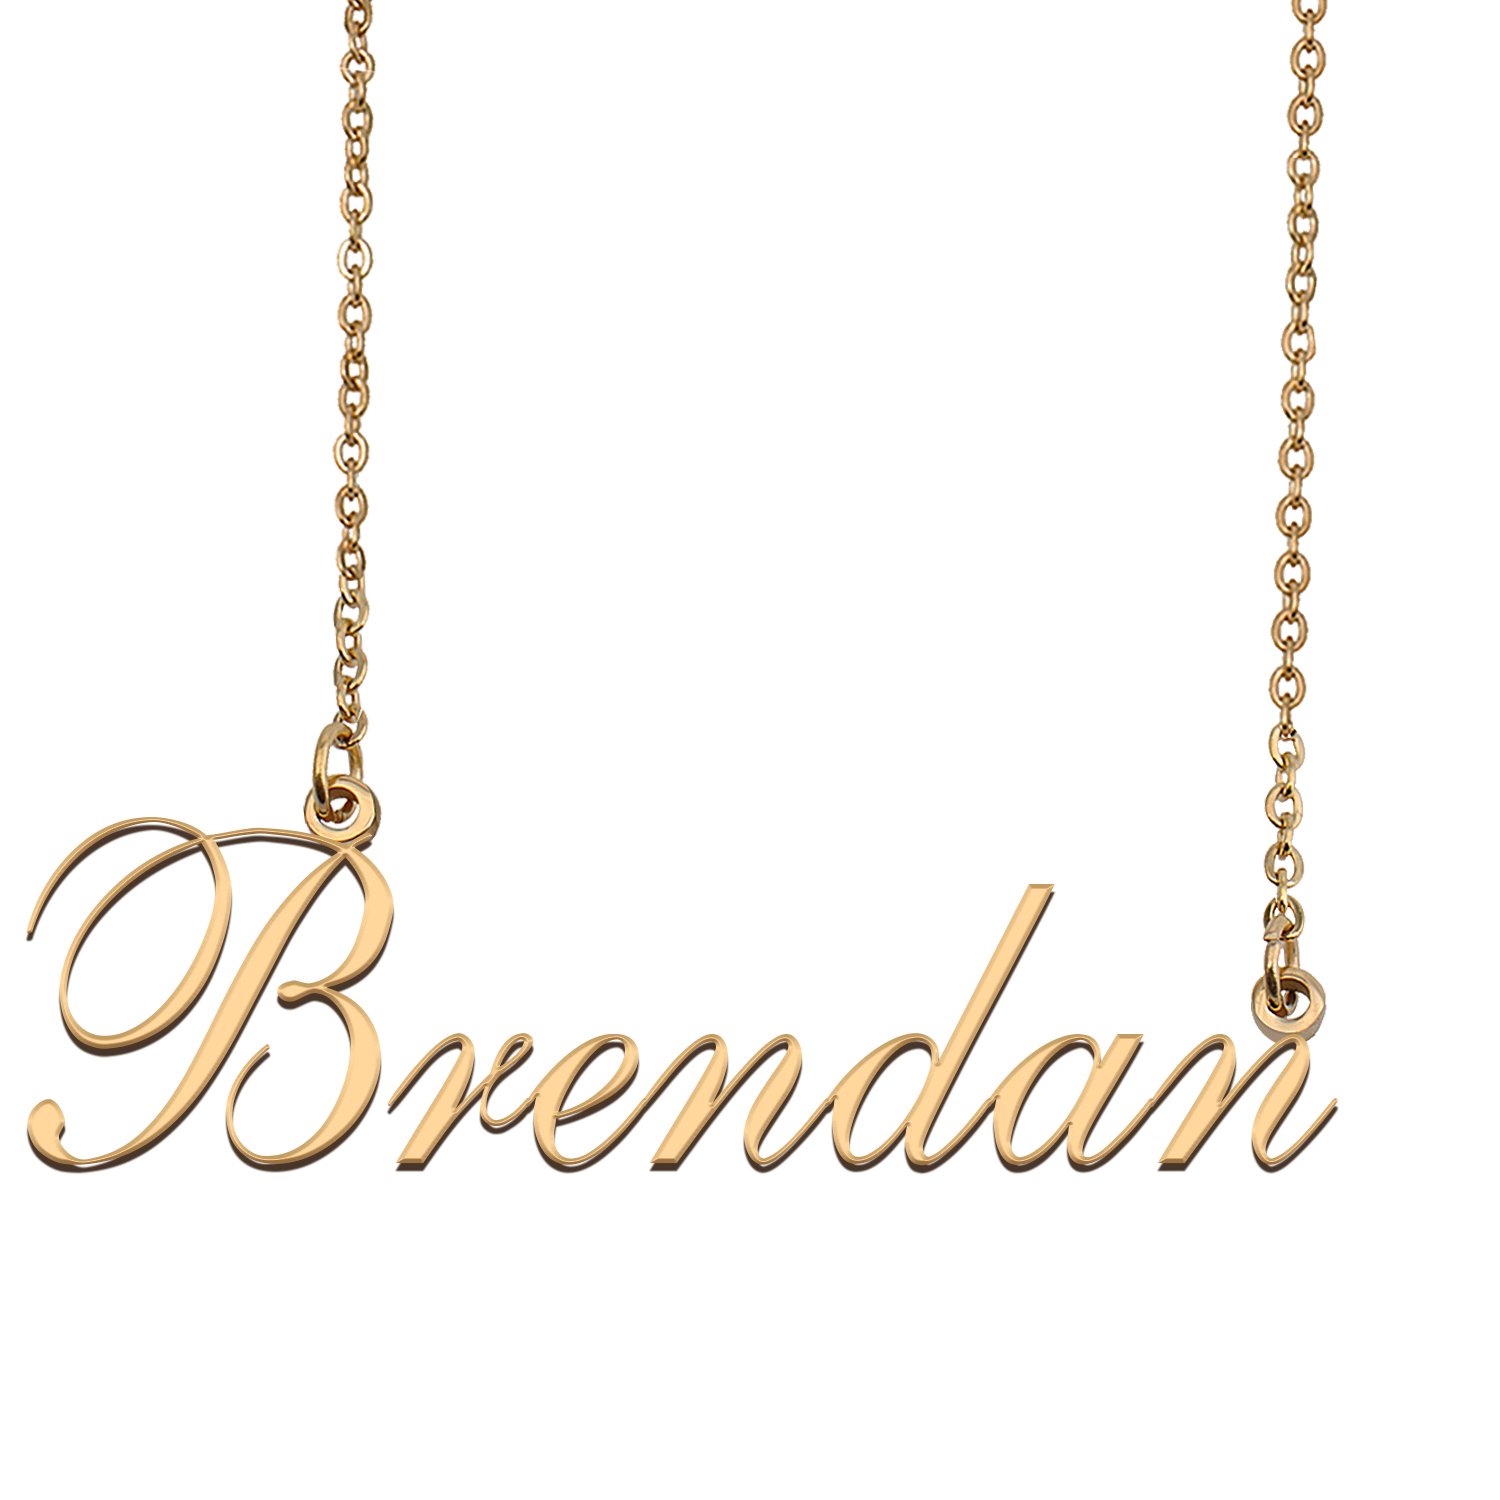 Custom Nameplate Necklace Personalized Jewelry Gifts for Women Brendan